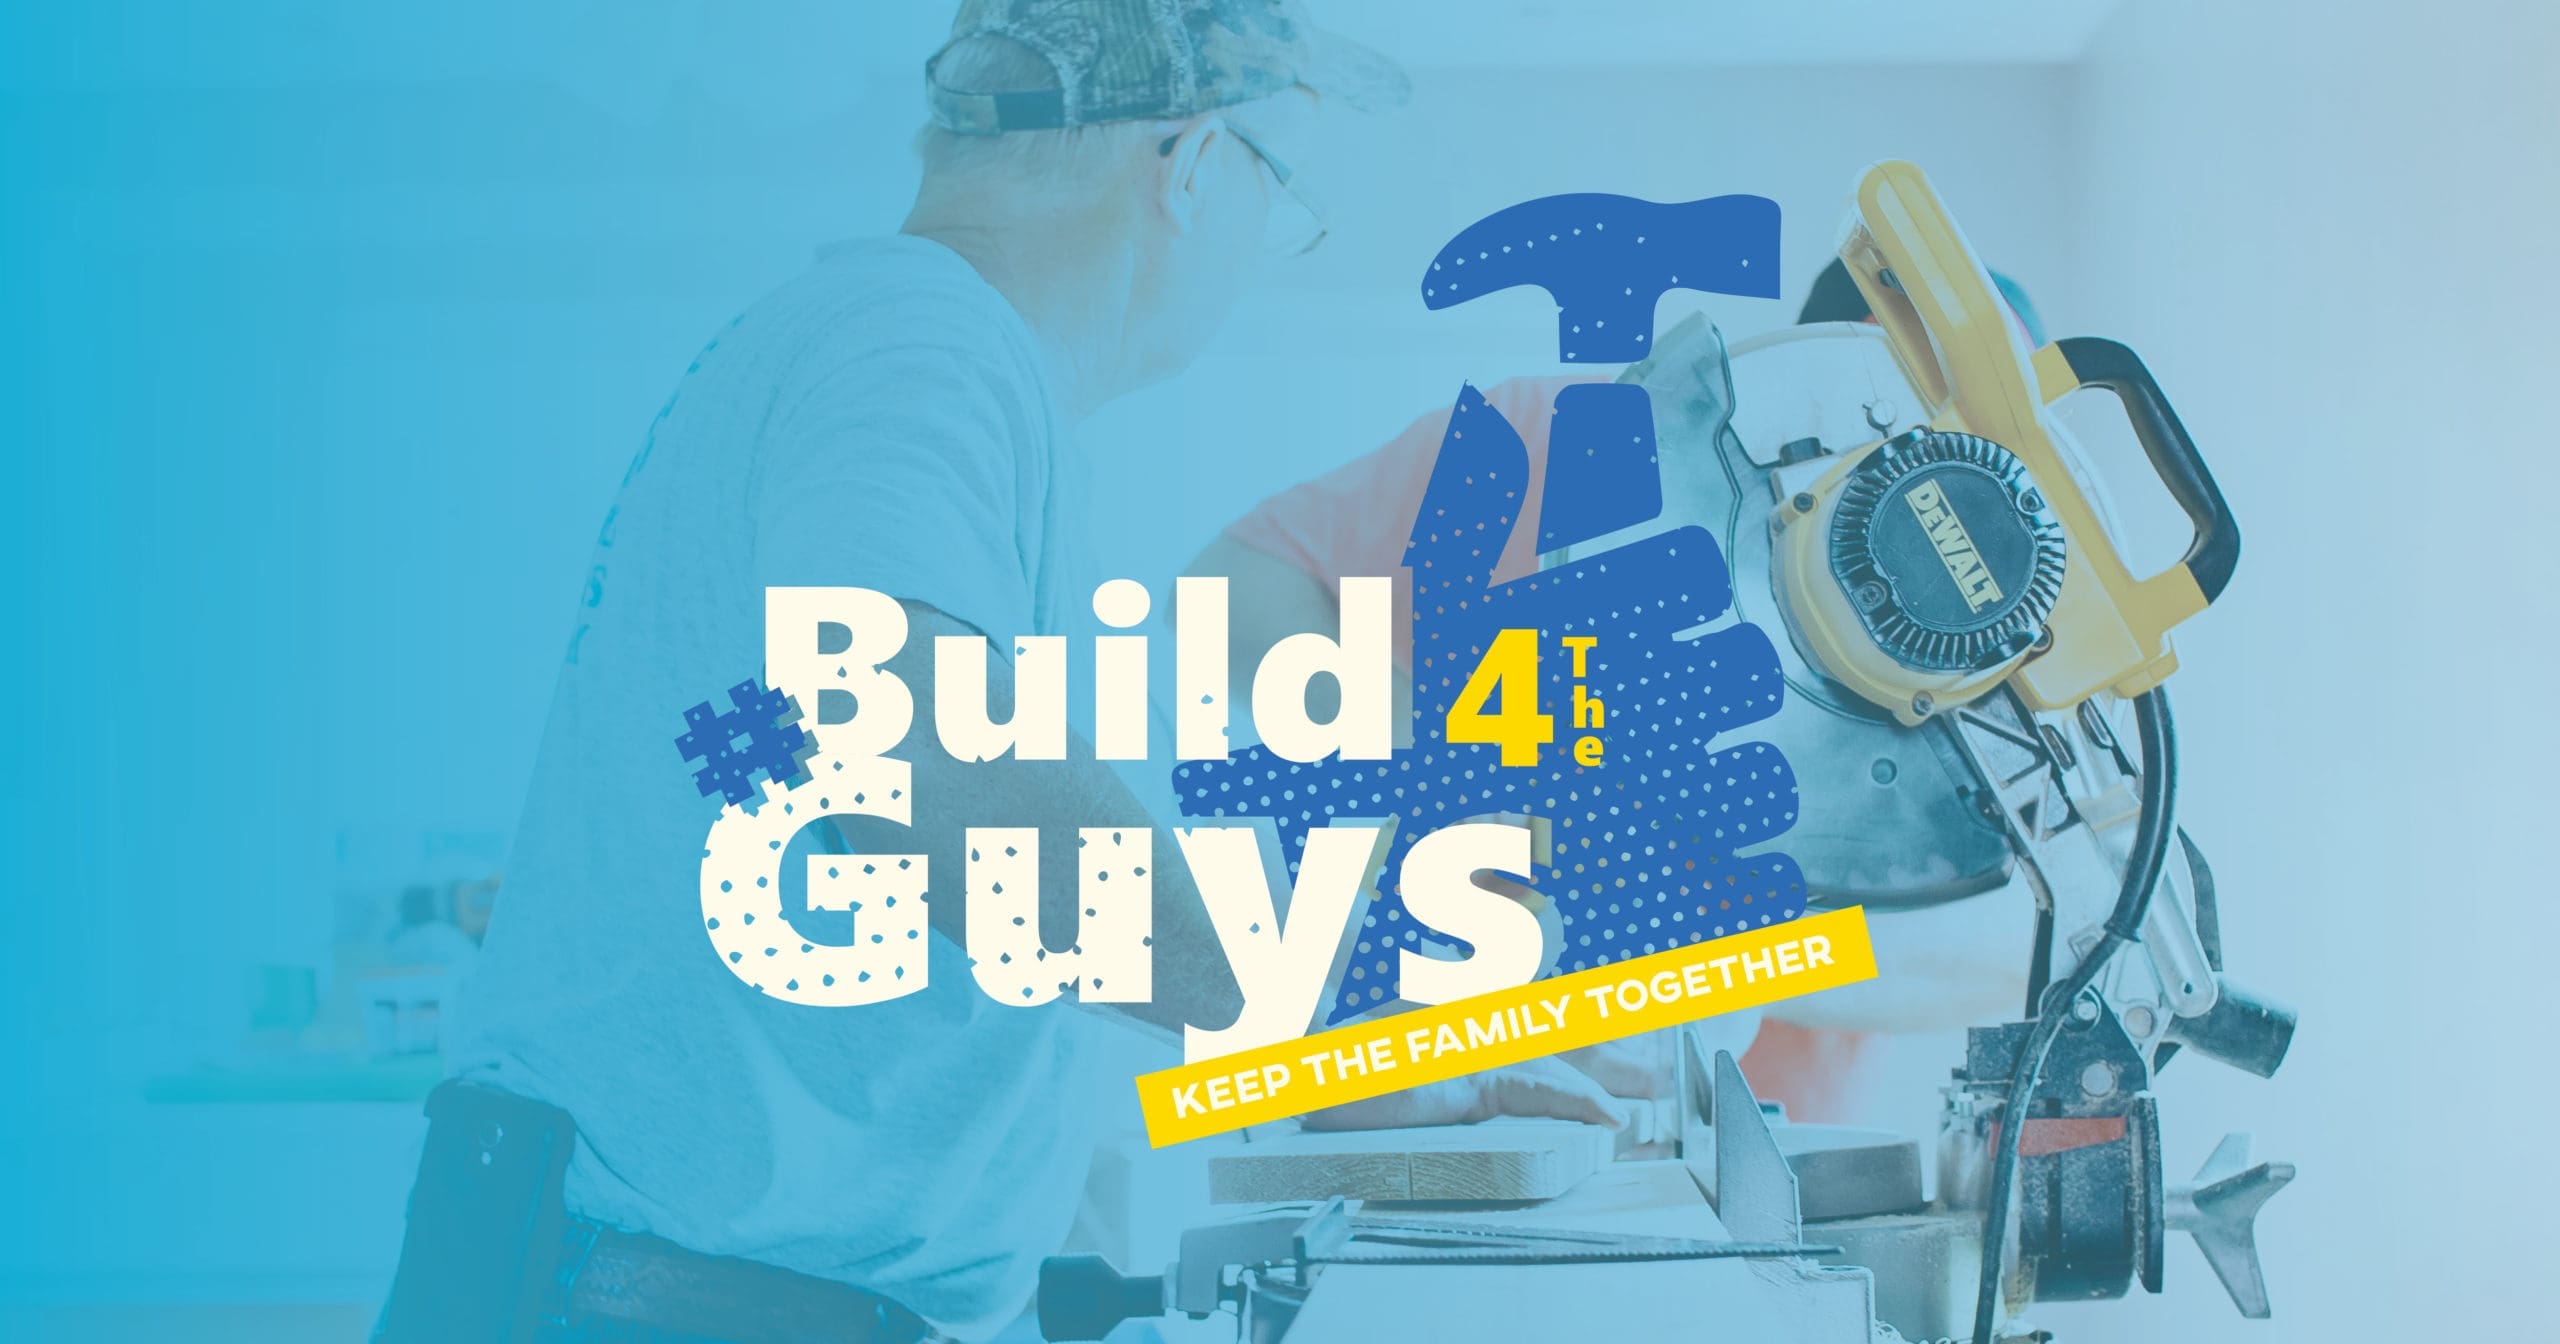 An Update on #Build4TheGuys